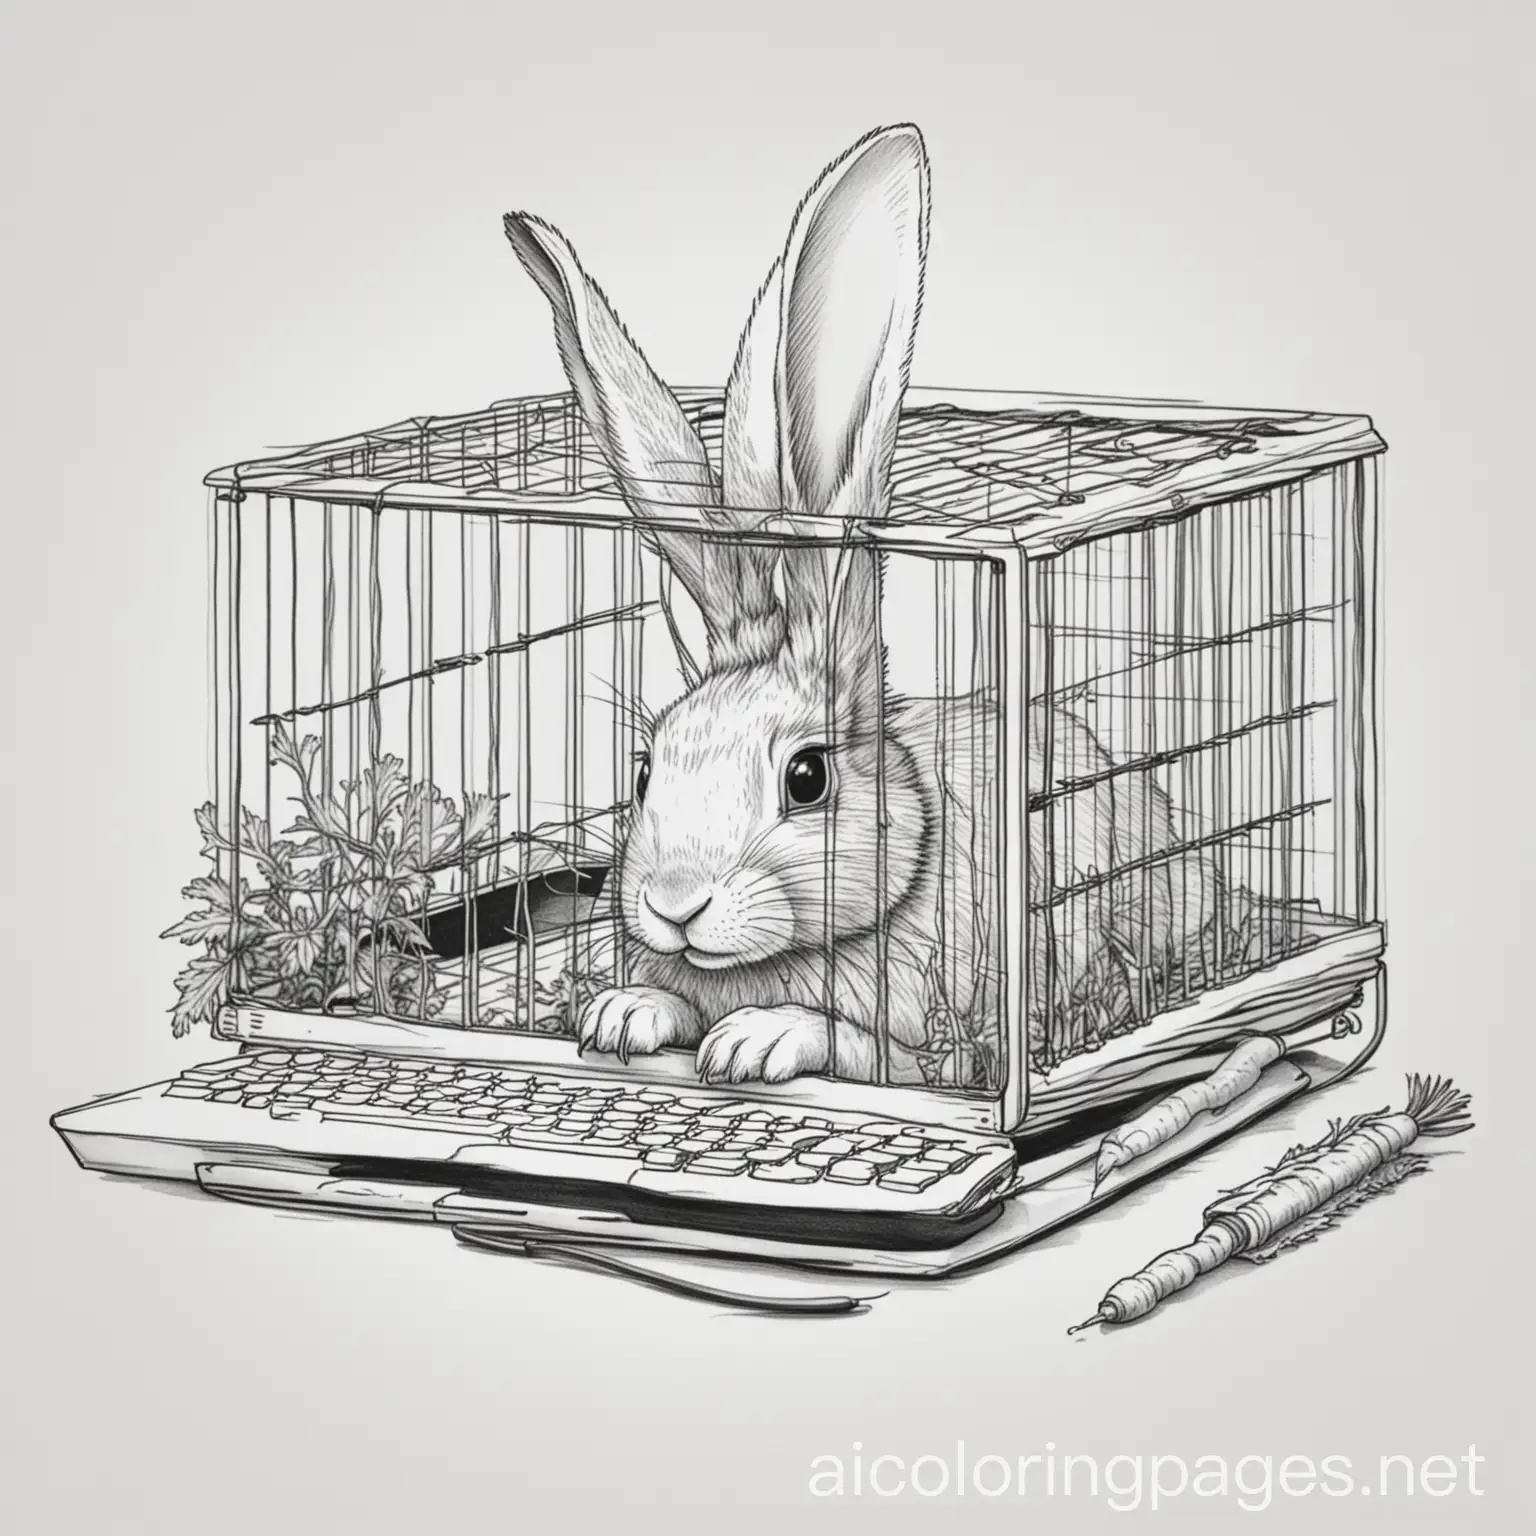 A rabbit in a cage eating carrot near a computer, Coloring Page, black and white, line art, white background, Simplicity, Ample White Space